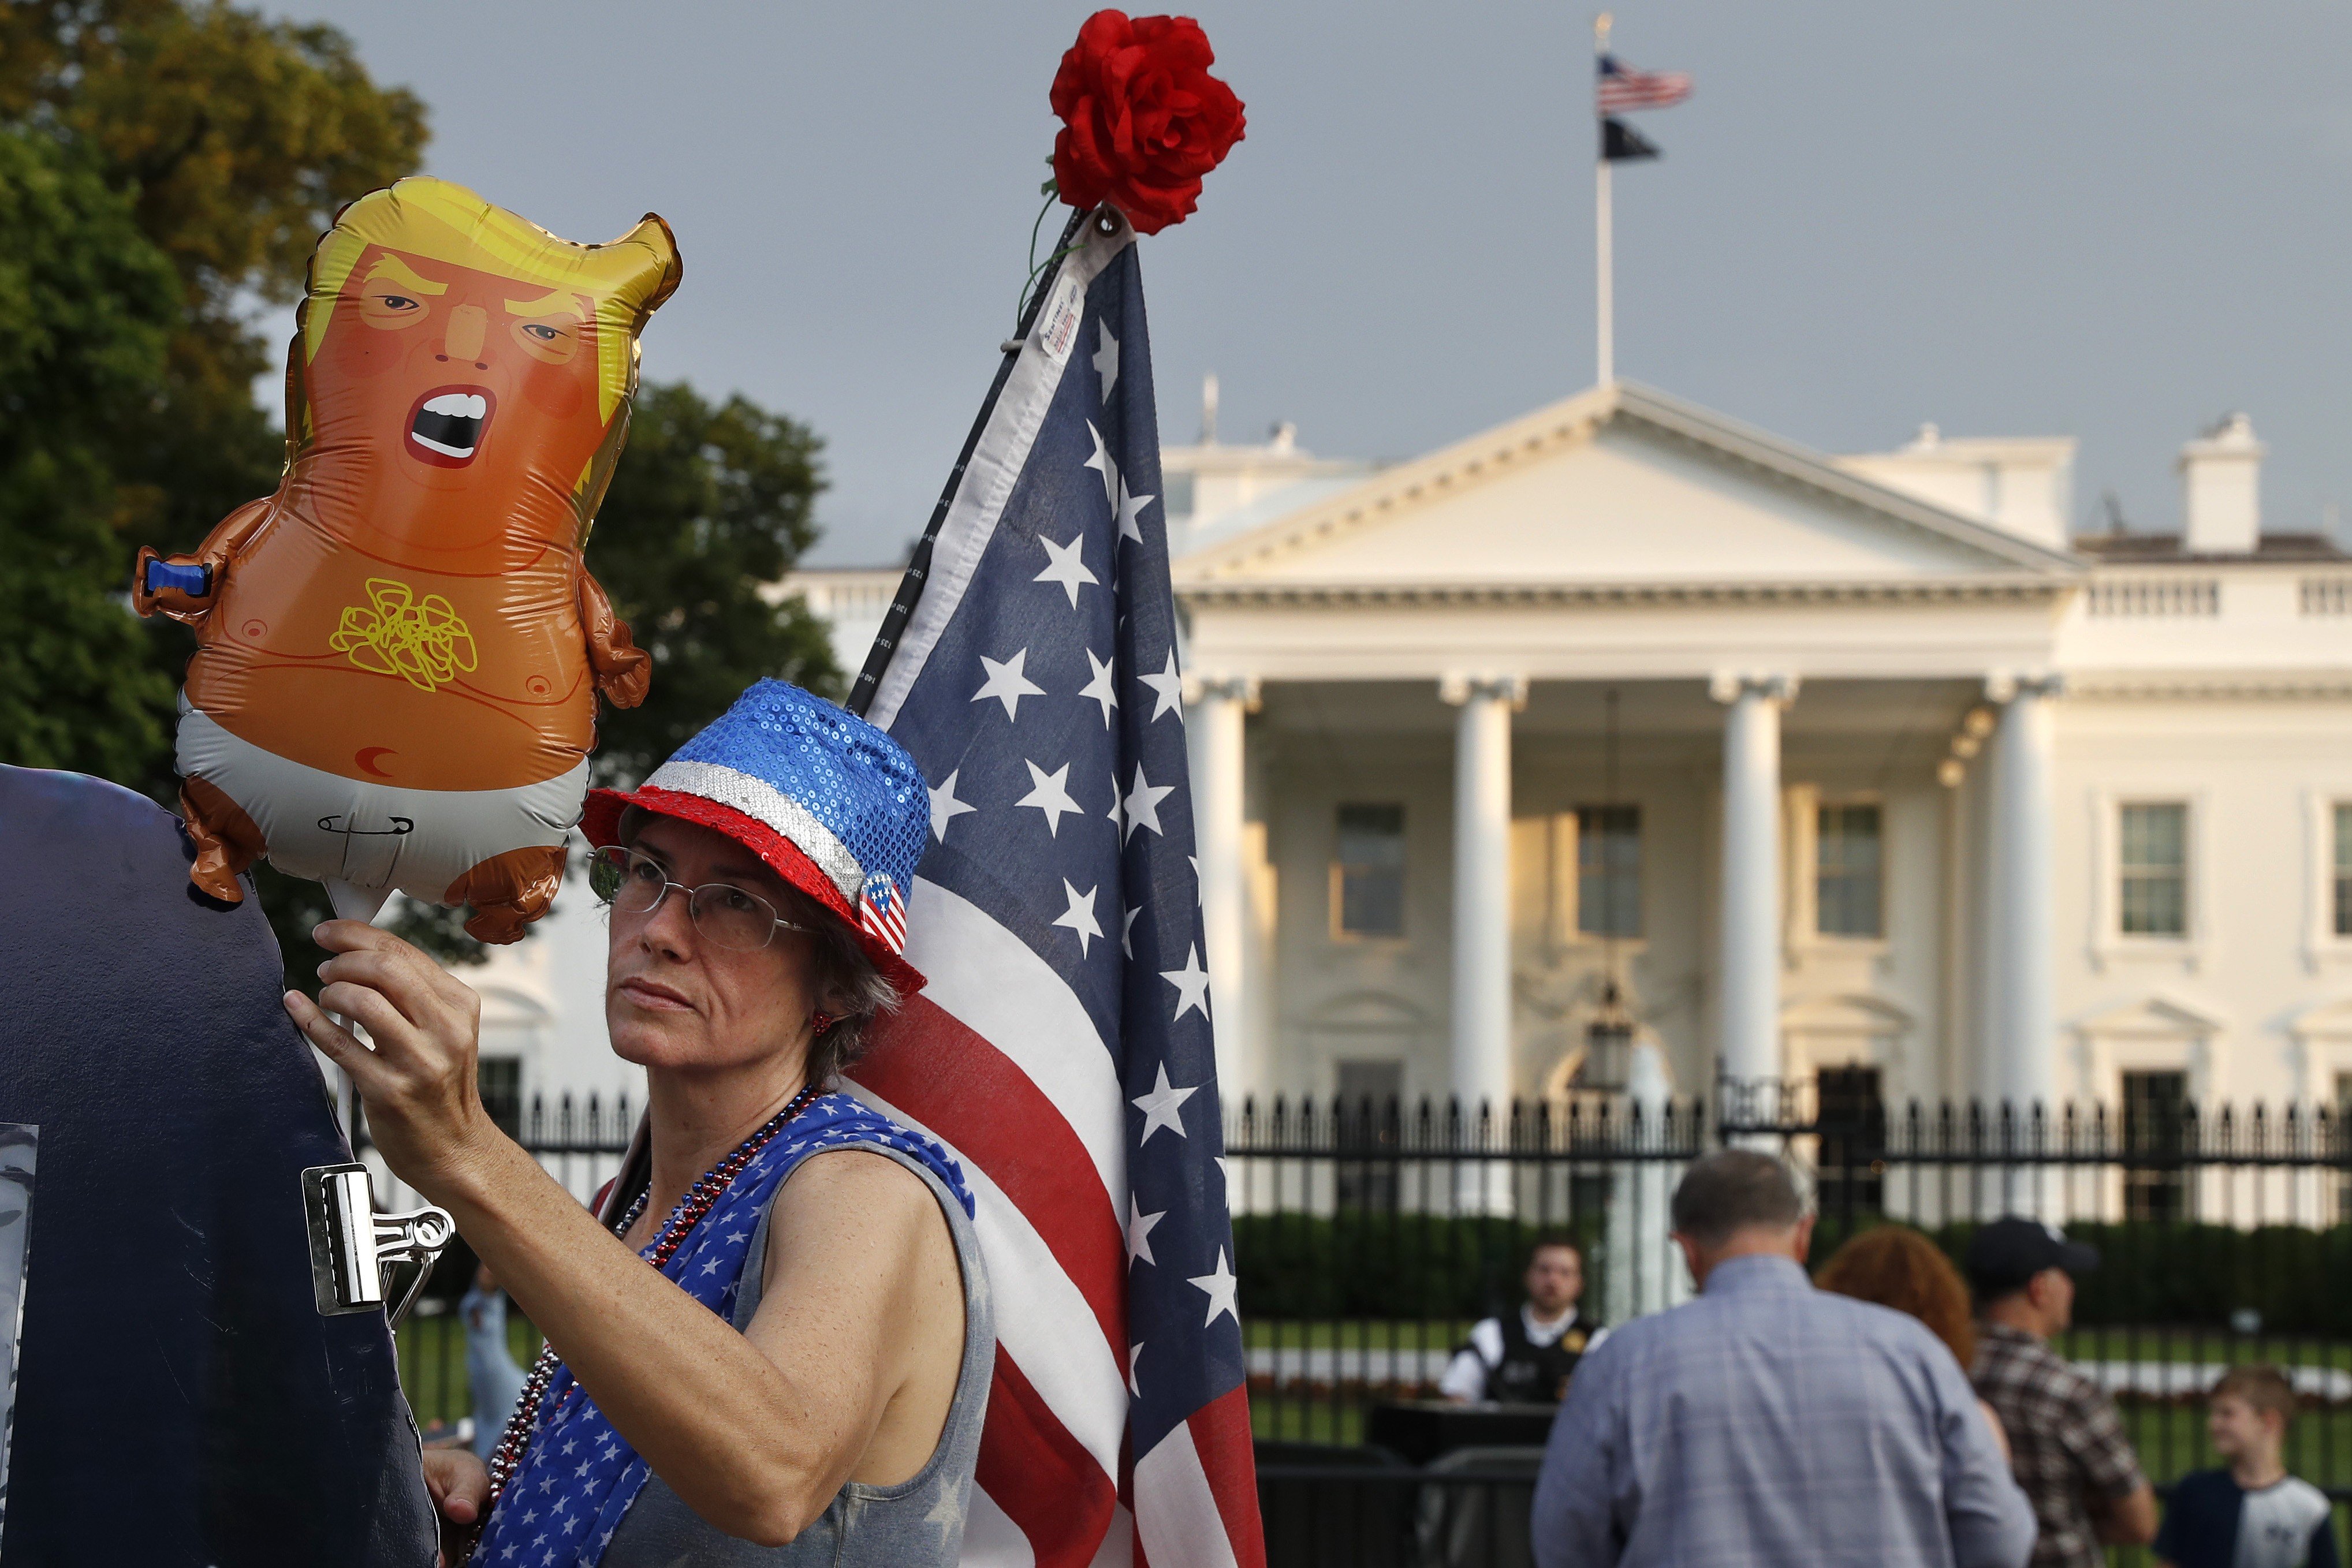 A woman who describes herself as “a resister” adjusts a “Trump baby” balloon in front of the White House at the start of a protest against the US president along Pennsylvania Avenue on May 18. Photo: AP